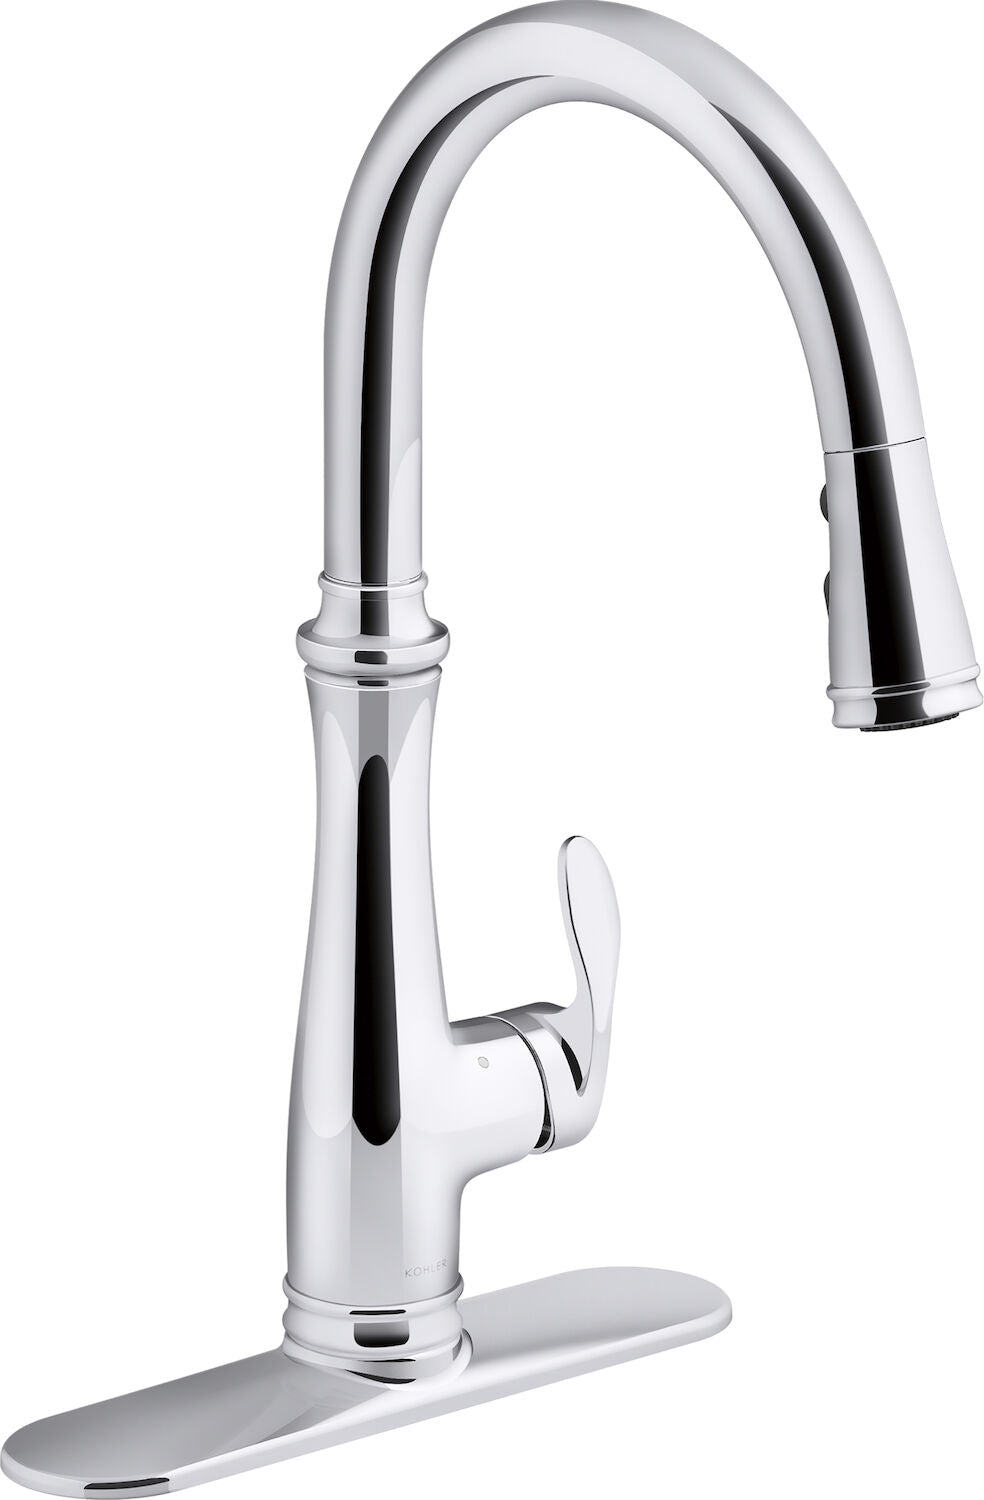 BELLERA® TOUCHLESS PULL-DOWN KITCHEN SINK FAUCET